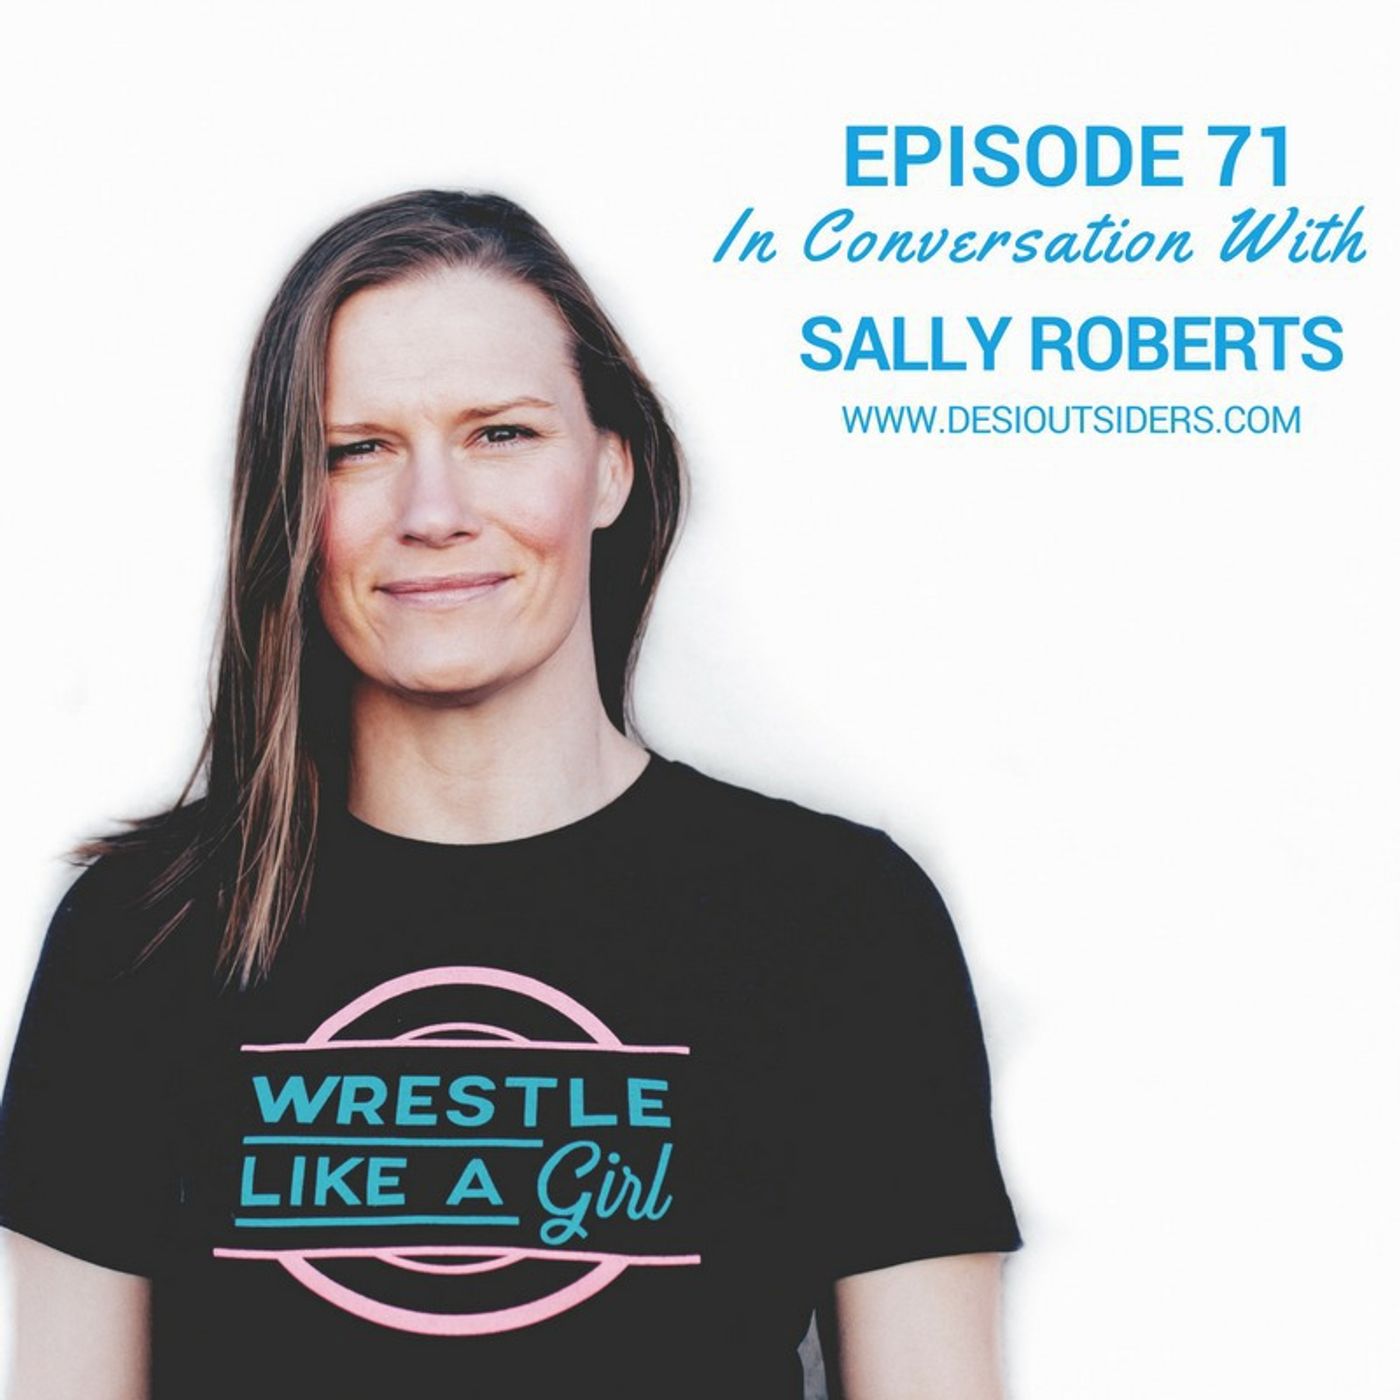 S5 Ep17: Episode 71 - Sally Roberts from Wrestle Like A Girl